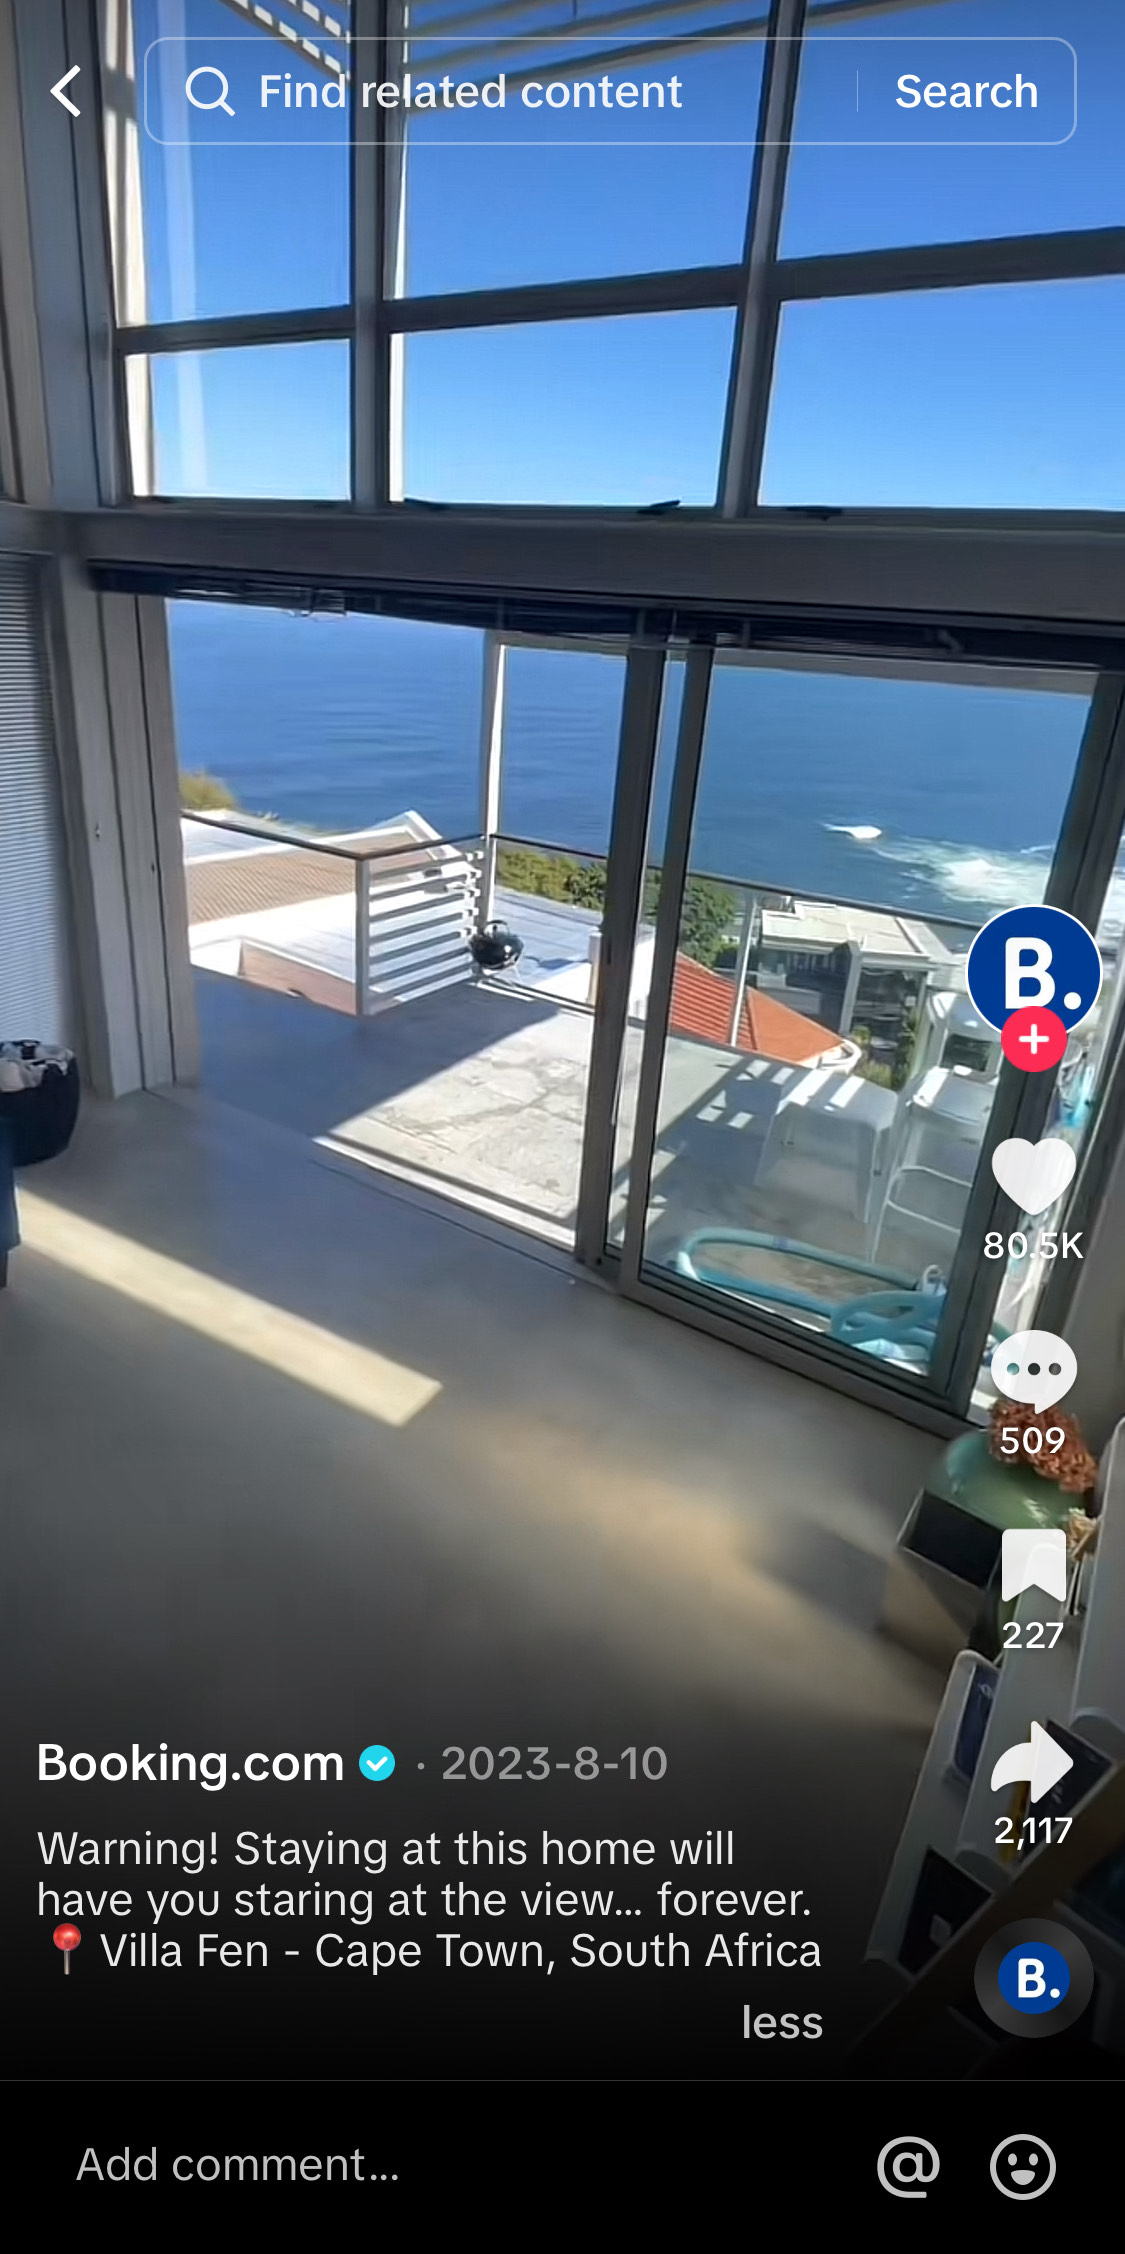 TikTok screenshot showing how Booking.com uses relevant keywords like "home" "view" and "cape town". 